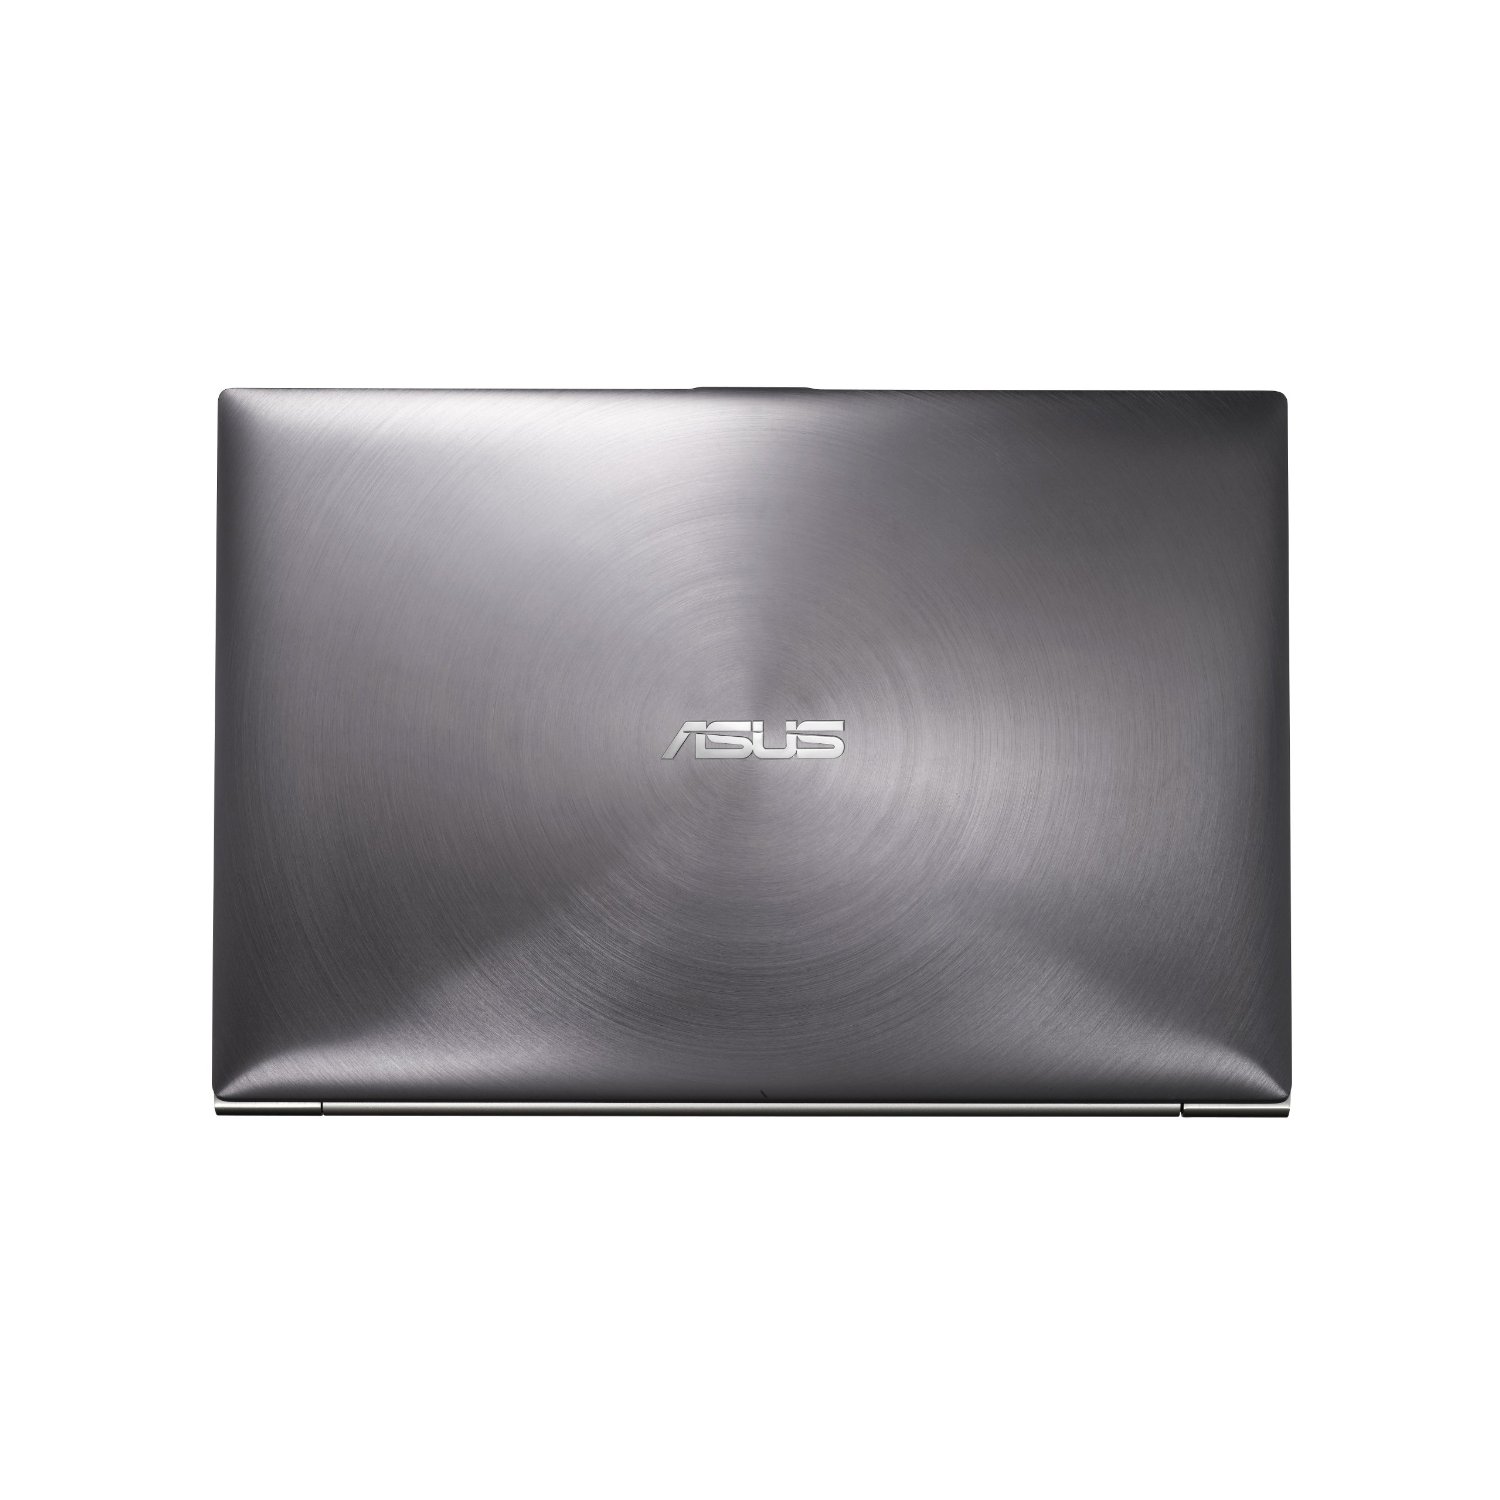 http://thetechjournal.com/wp-content/uploads/images/1111/1322100736-asus-zenbook-ux31edh72-133inch-thin-and-light-ultrabook-8.jpg